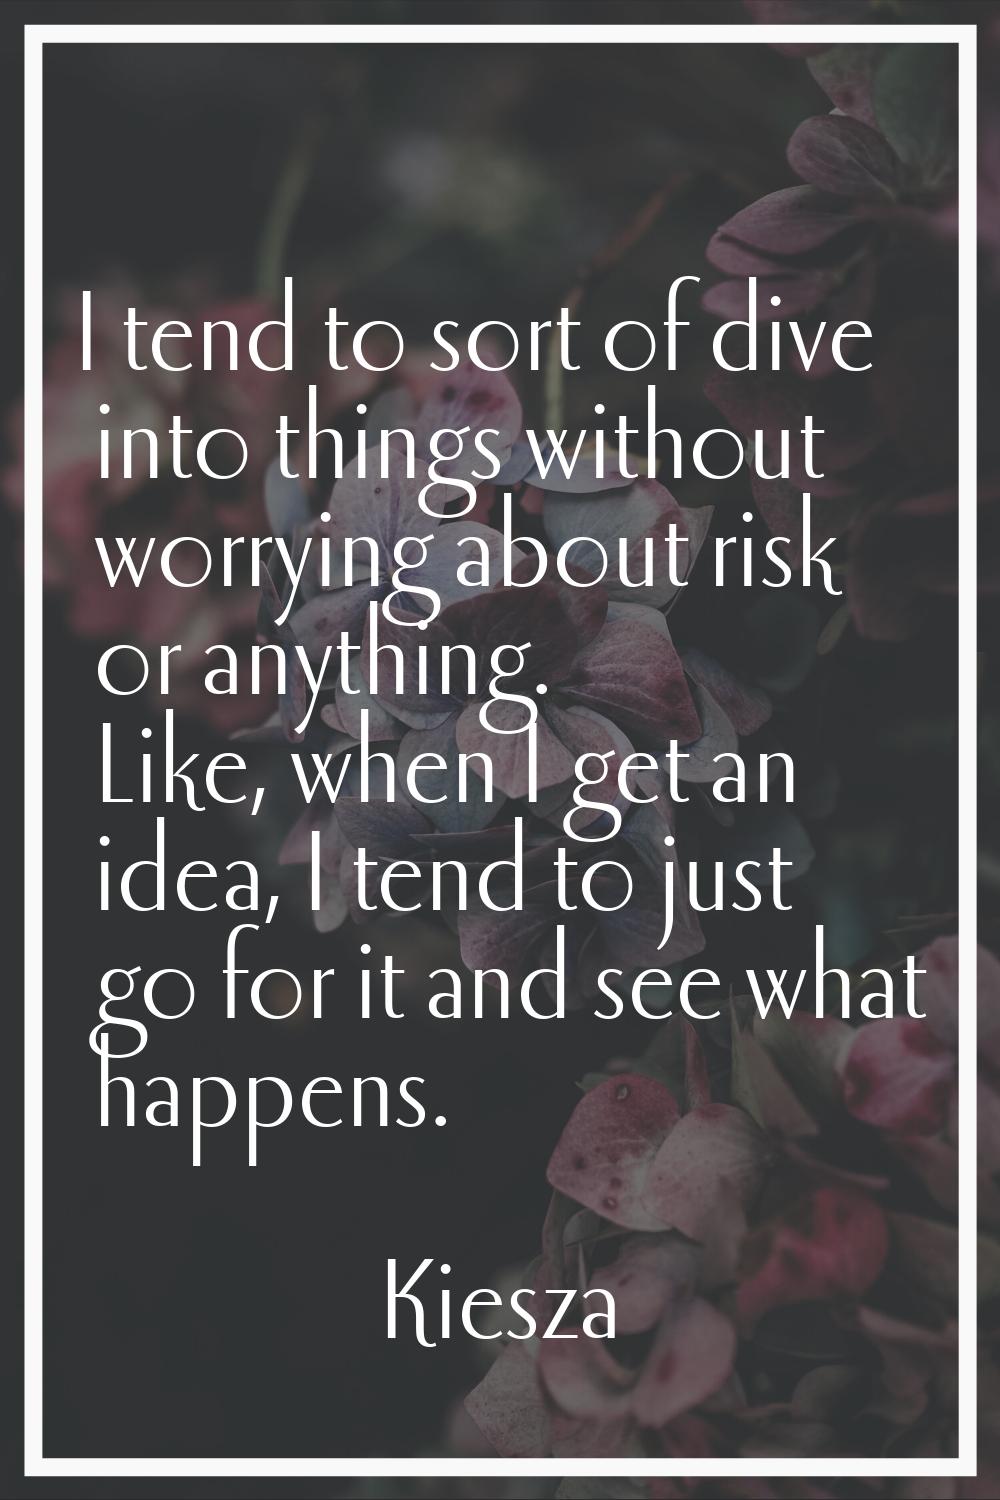 I tend to sort of dive into things without worrying about risk or anything. Like, when I get an ide